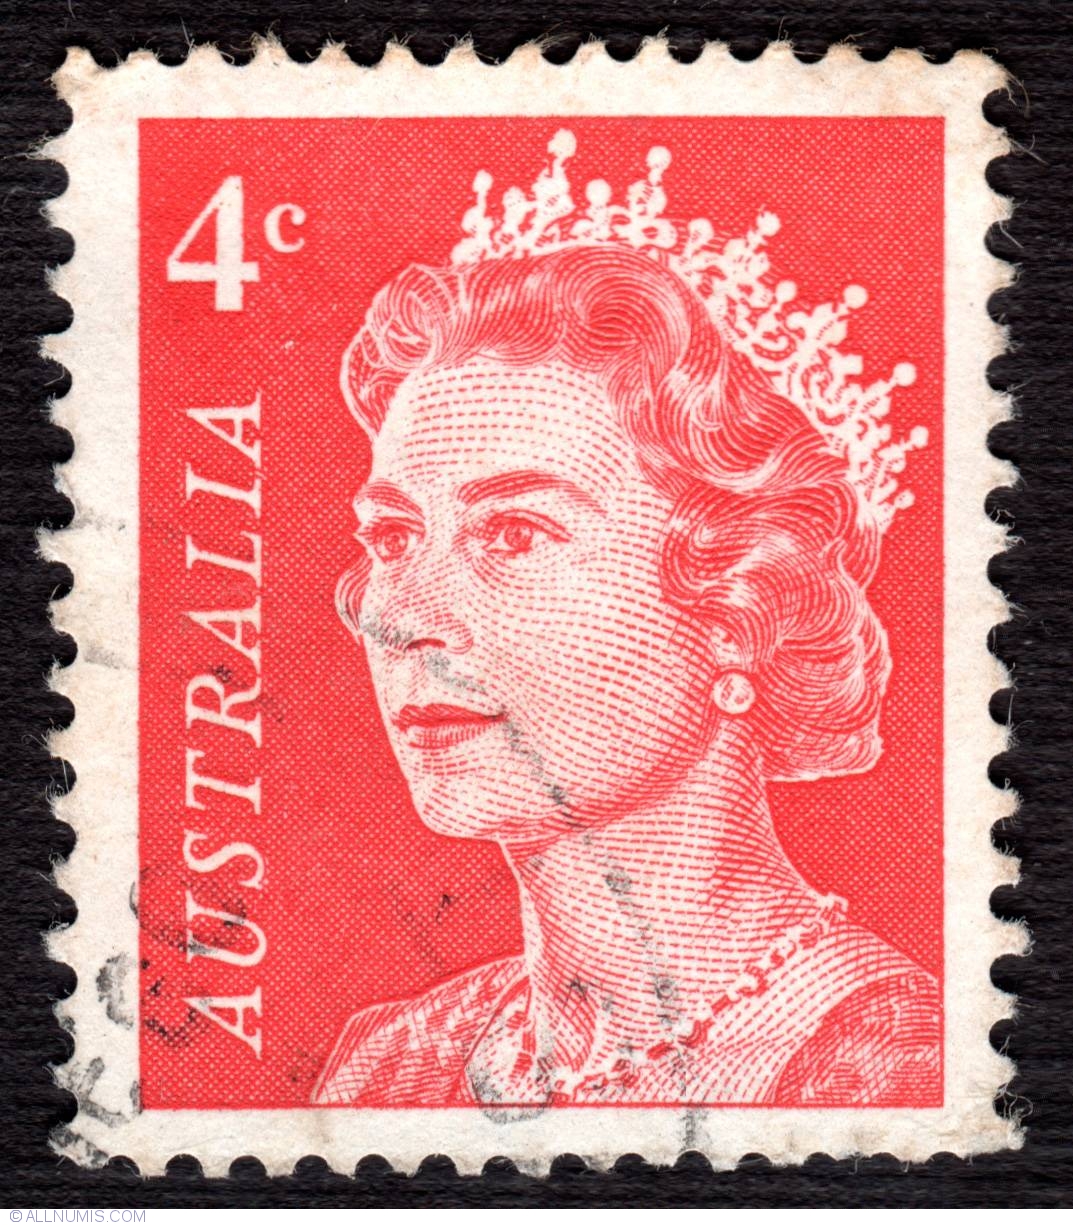 Top 100+ Pictures Most Valuable Rare Queen Elizabeth Stamps Full HD, 2k, 4k